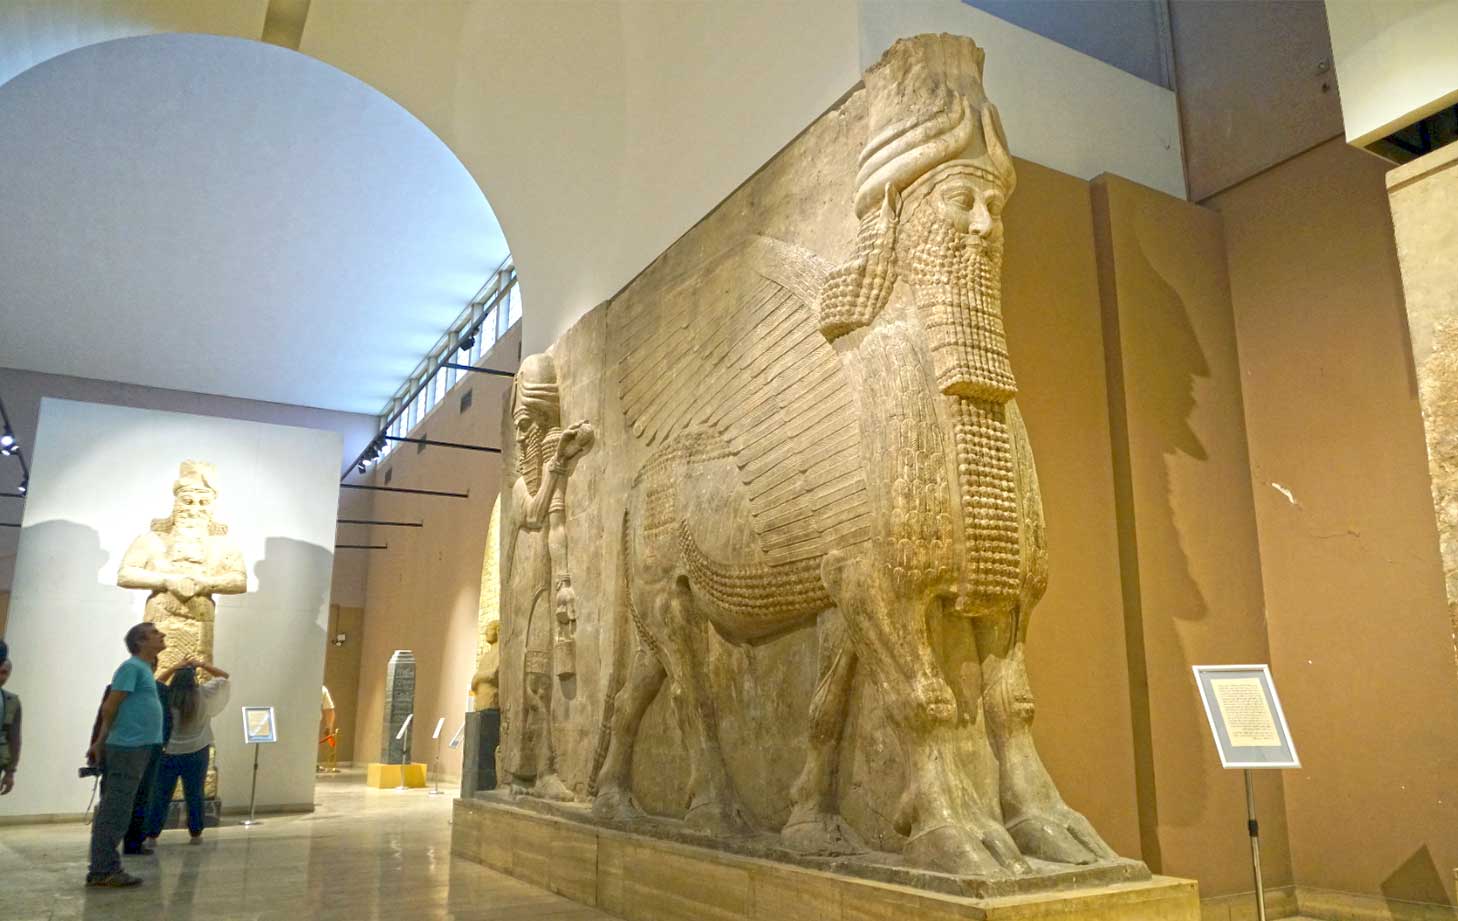 The National Museum of Iraq